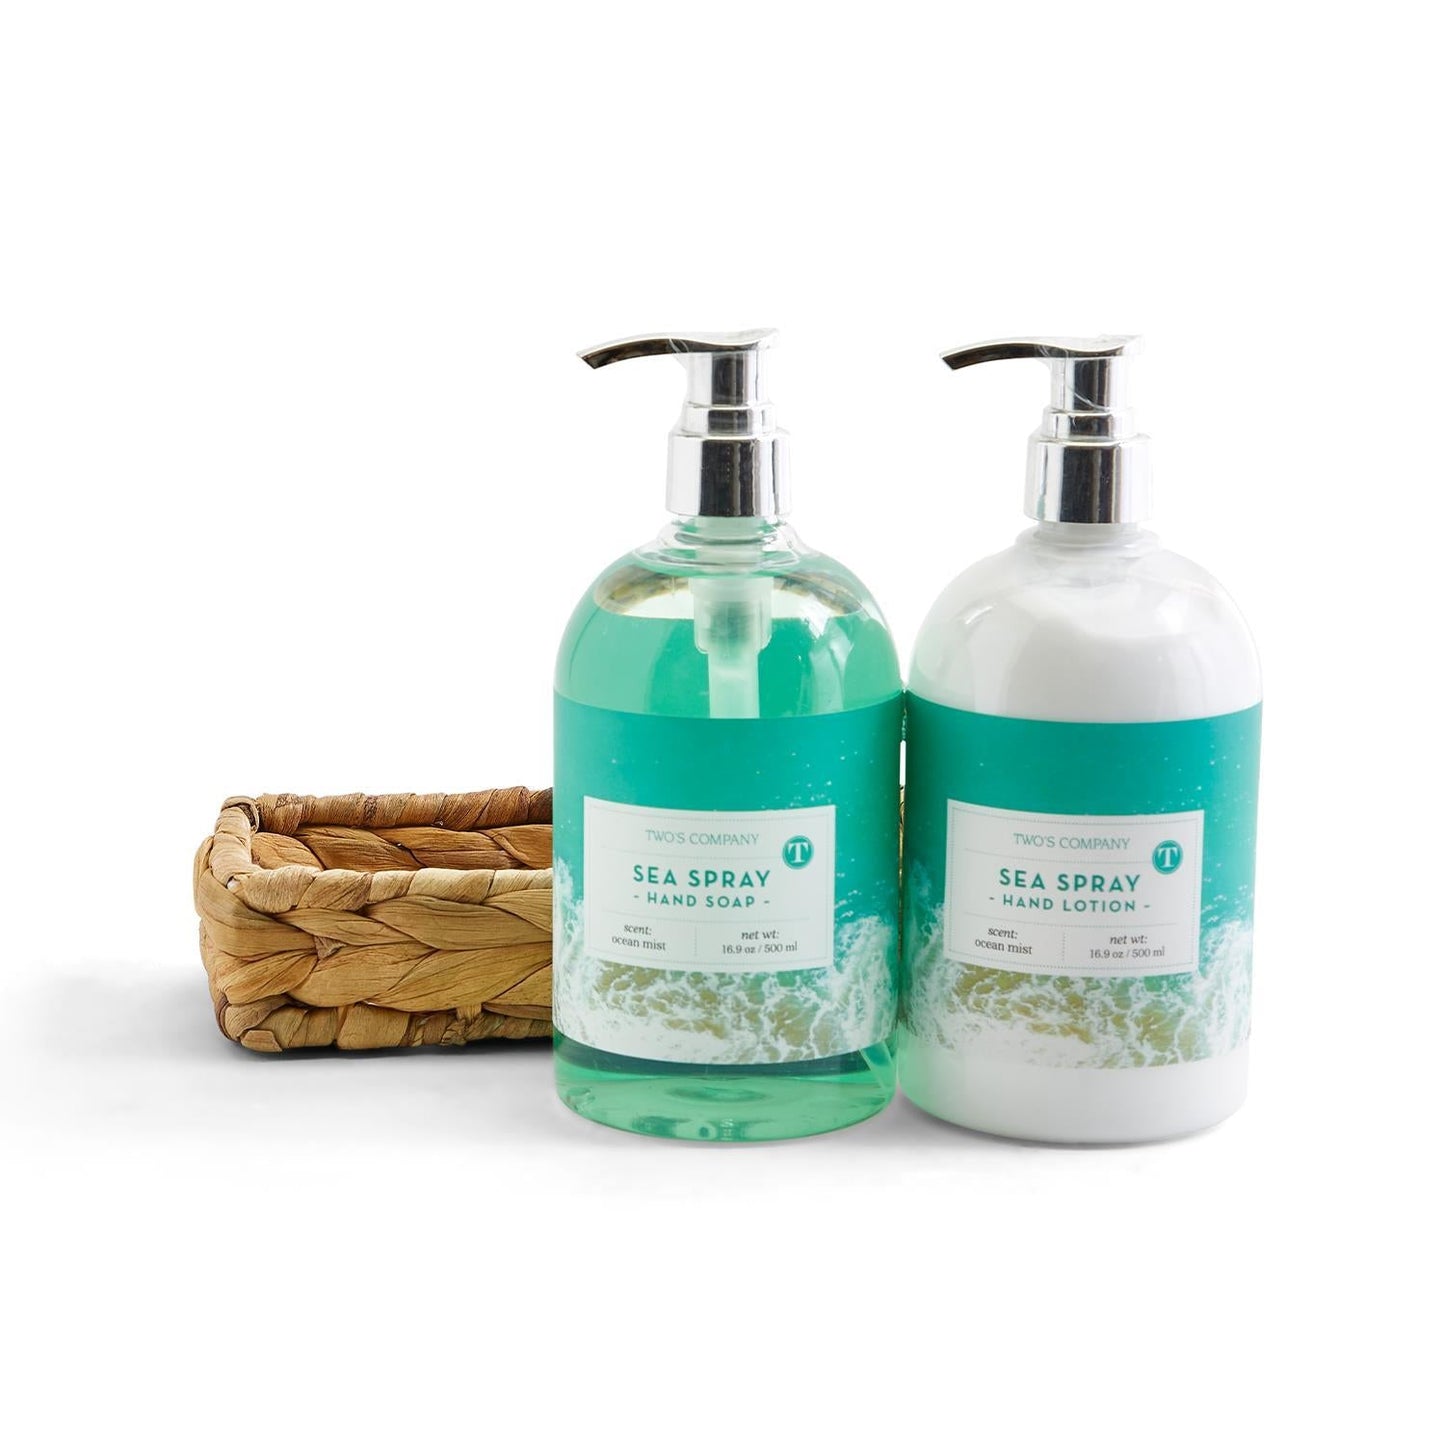 Sea Spray Ocean Scented Hand Soap and Lotion Set in Hand-Crafted Reed Tray - 16.9-oz each - Mellow Monkey